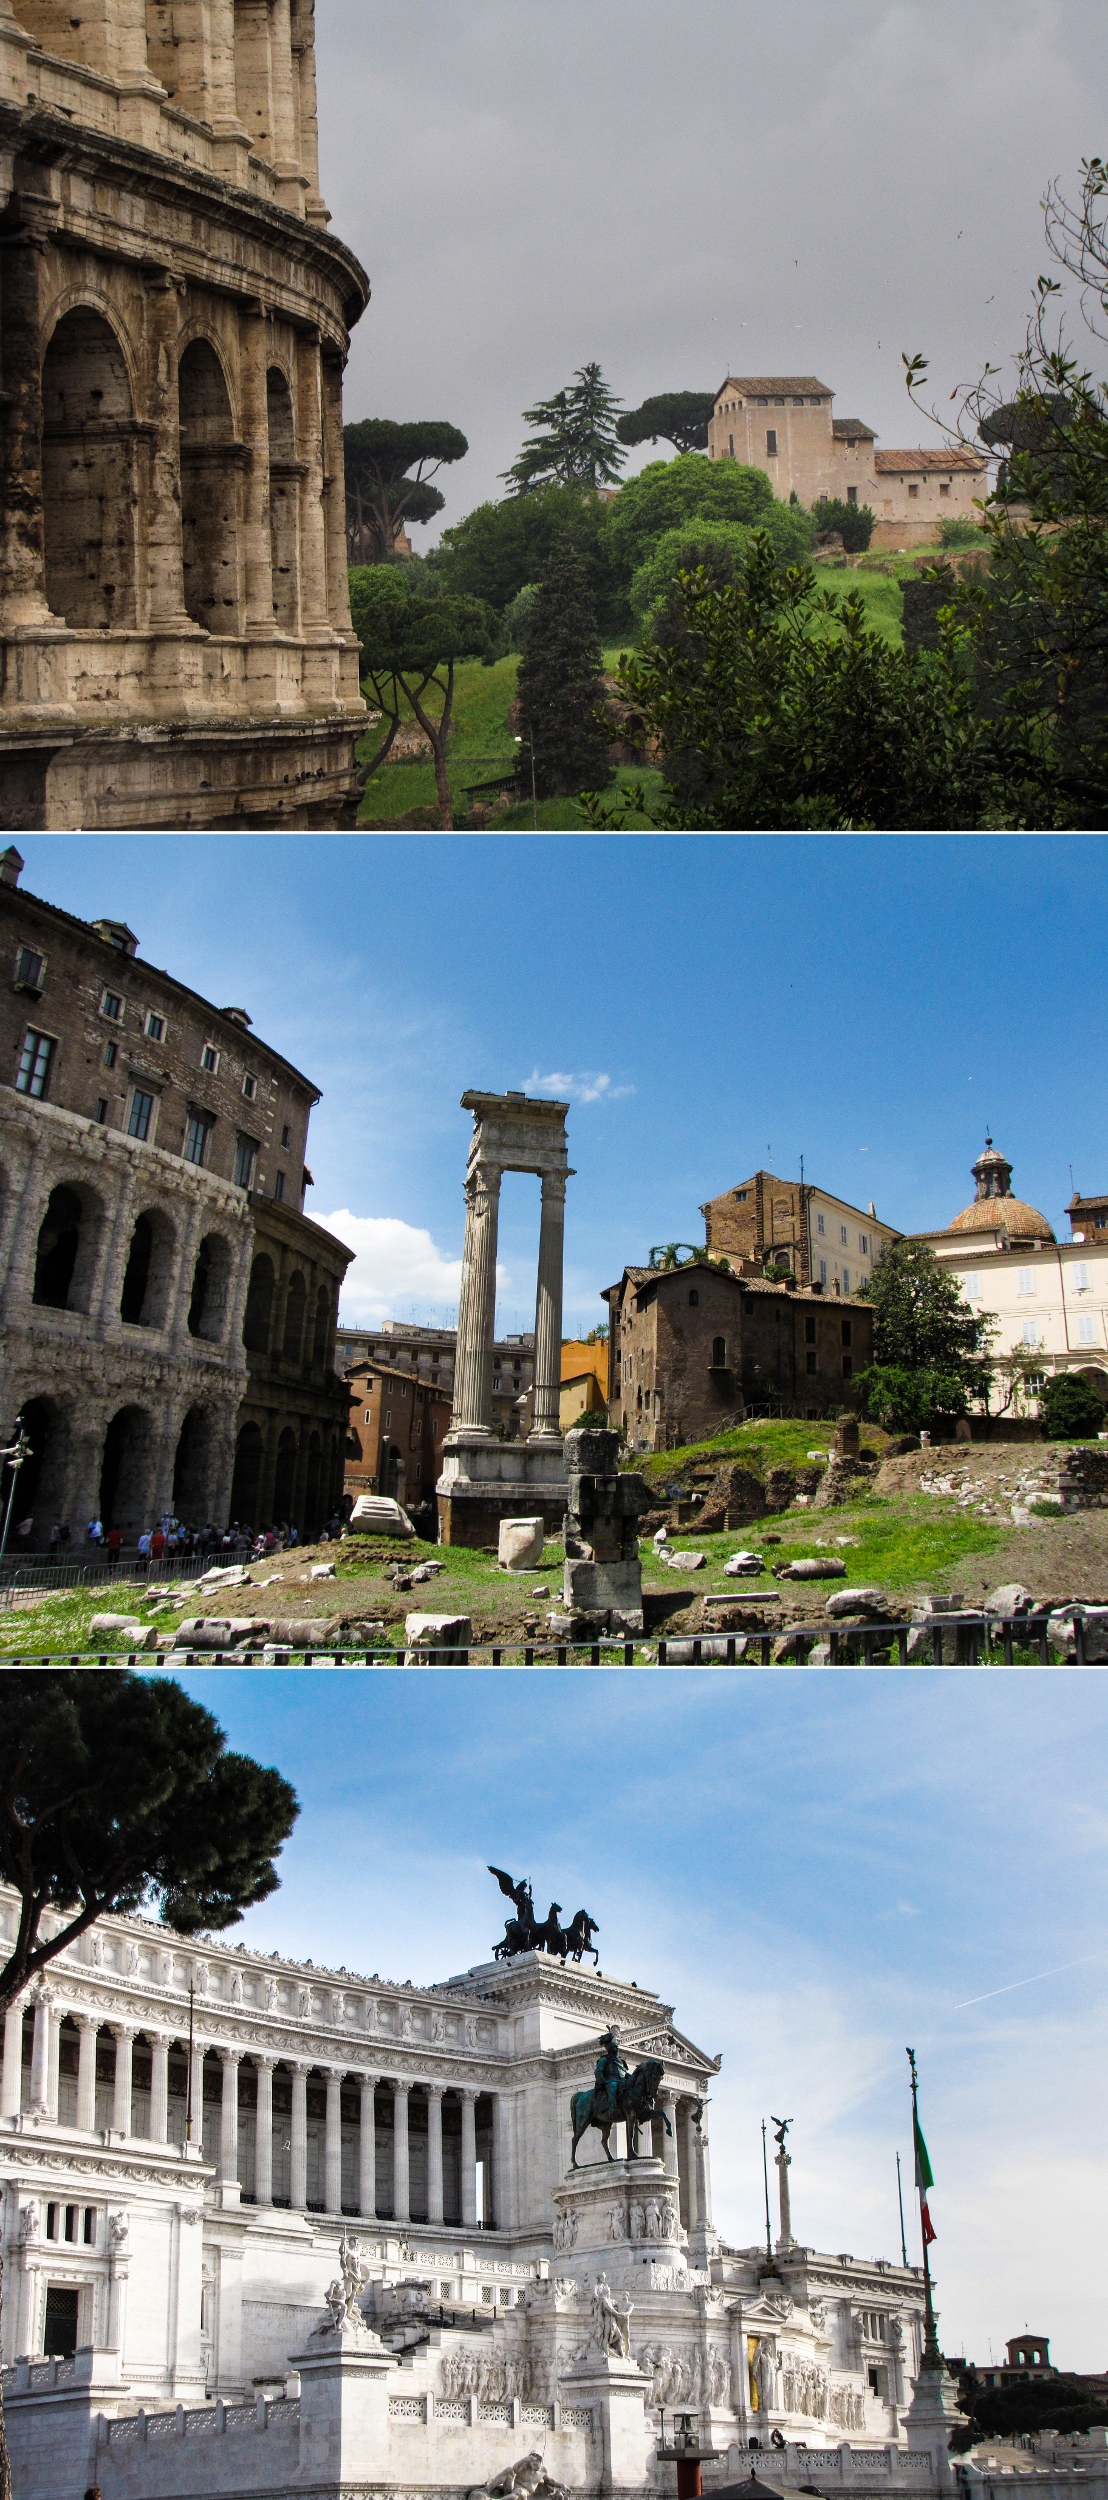 Sights of Rome